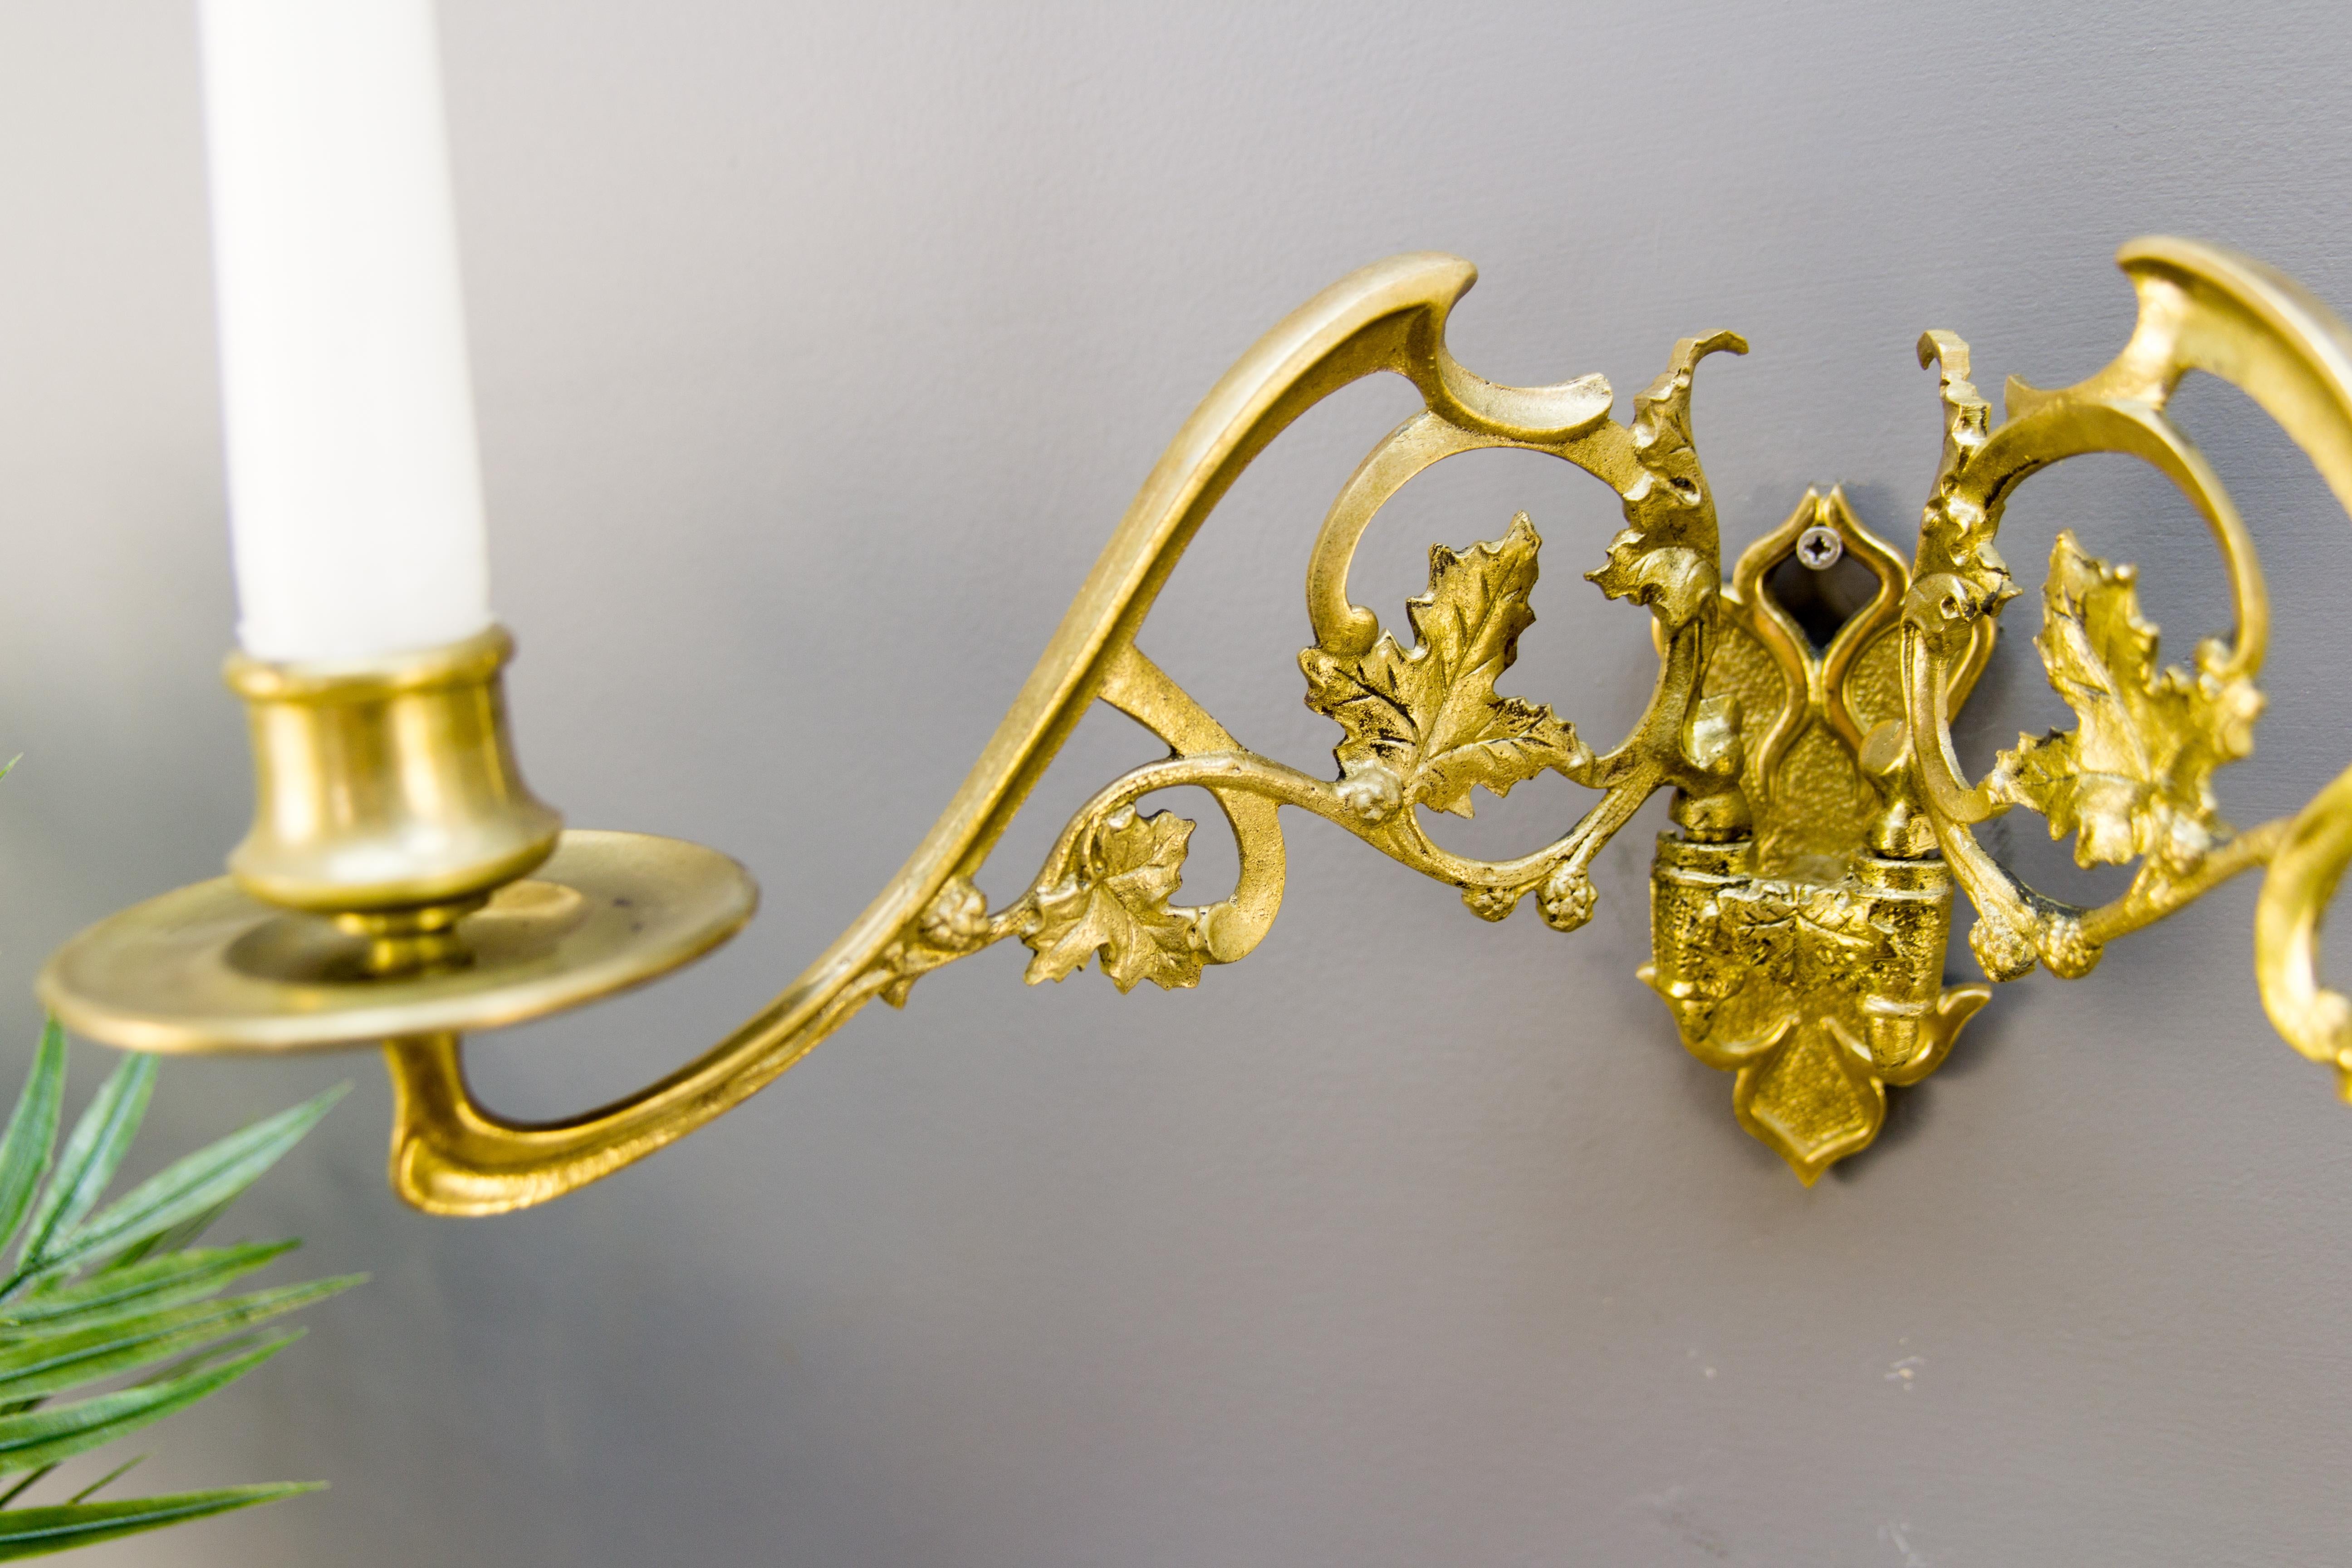 Piano Candlestick Candle Single Arm Wall Light/Art Nouveau Style Brass Gold Colours 